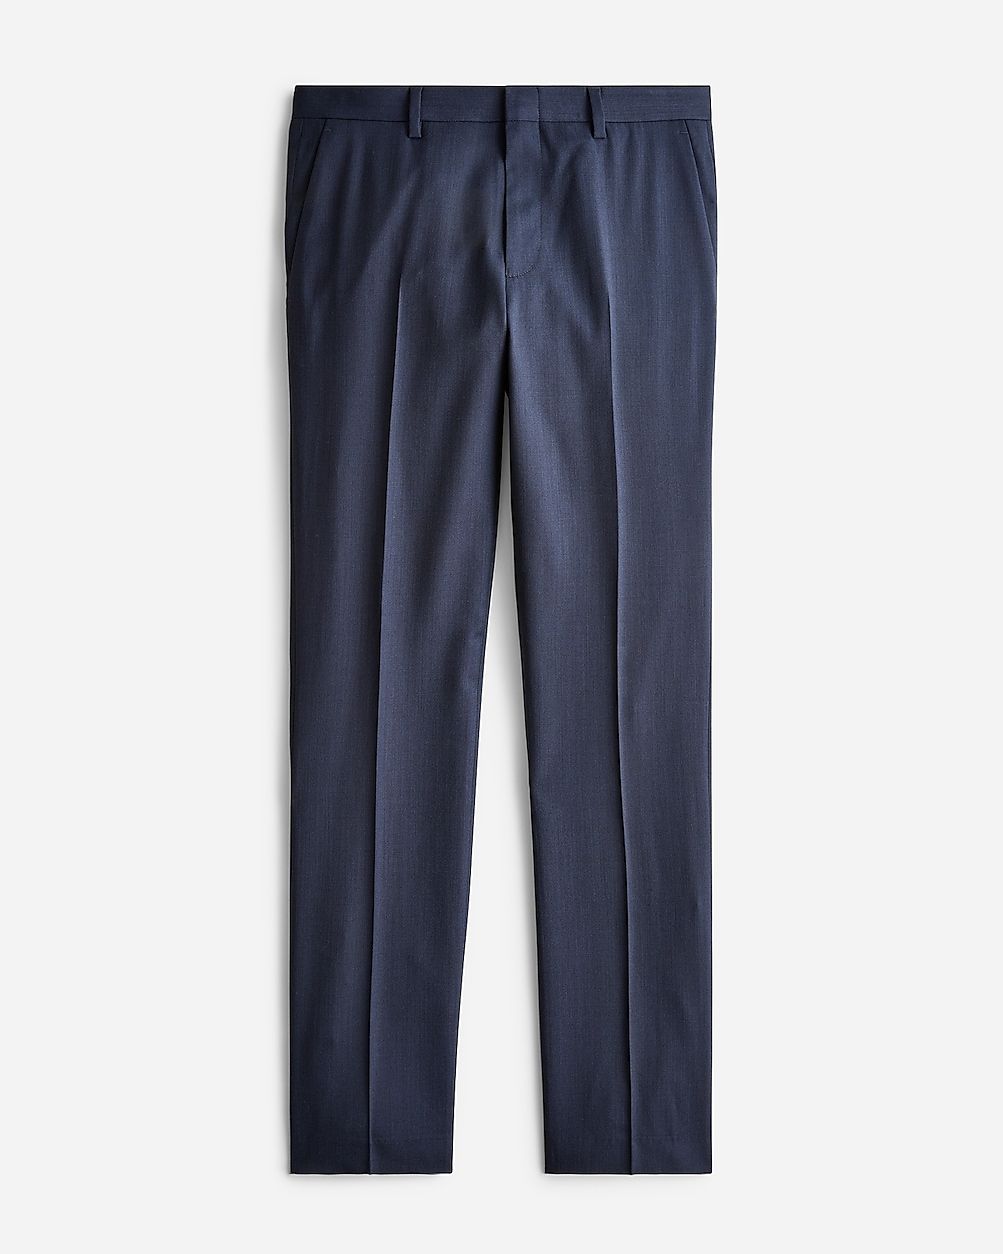 Ludlow Slim-fit suit pant in Italian stretch worsted wool | J.Crew US